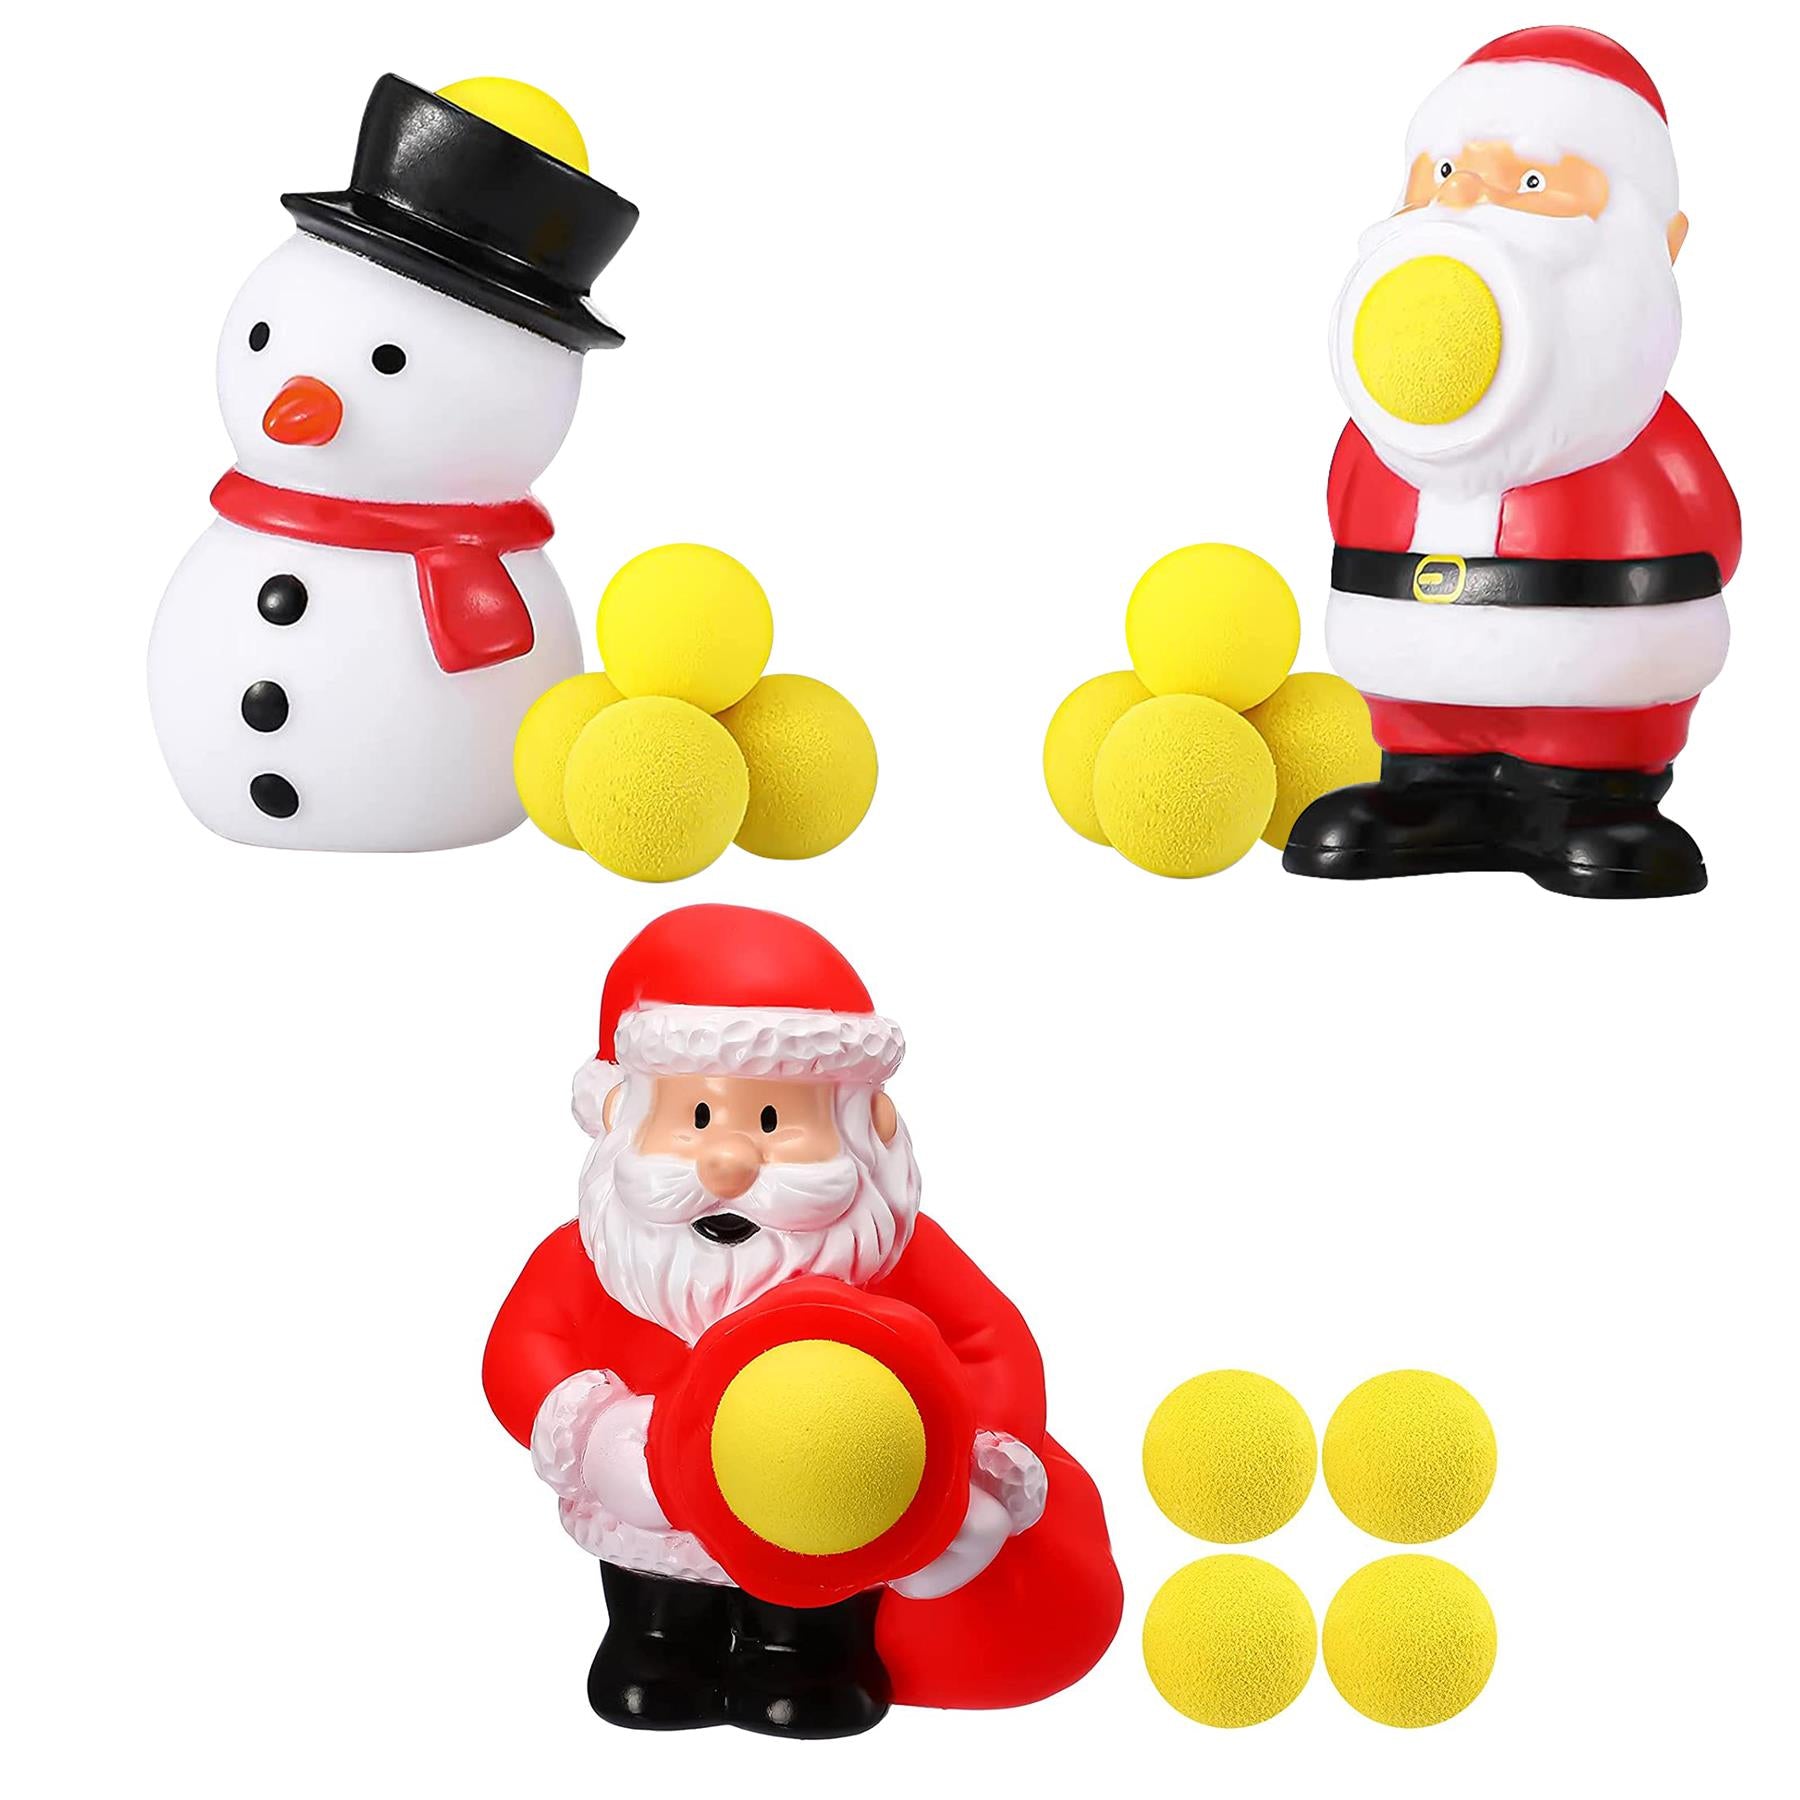 Christmas Popper Shooter Toy by The Magic Toy Shop - The Magic Toy Shop